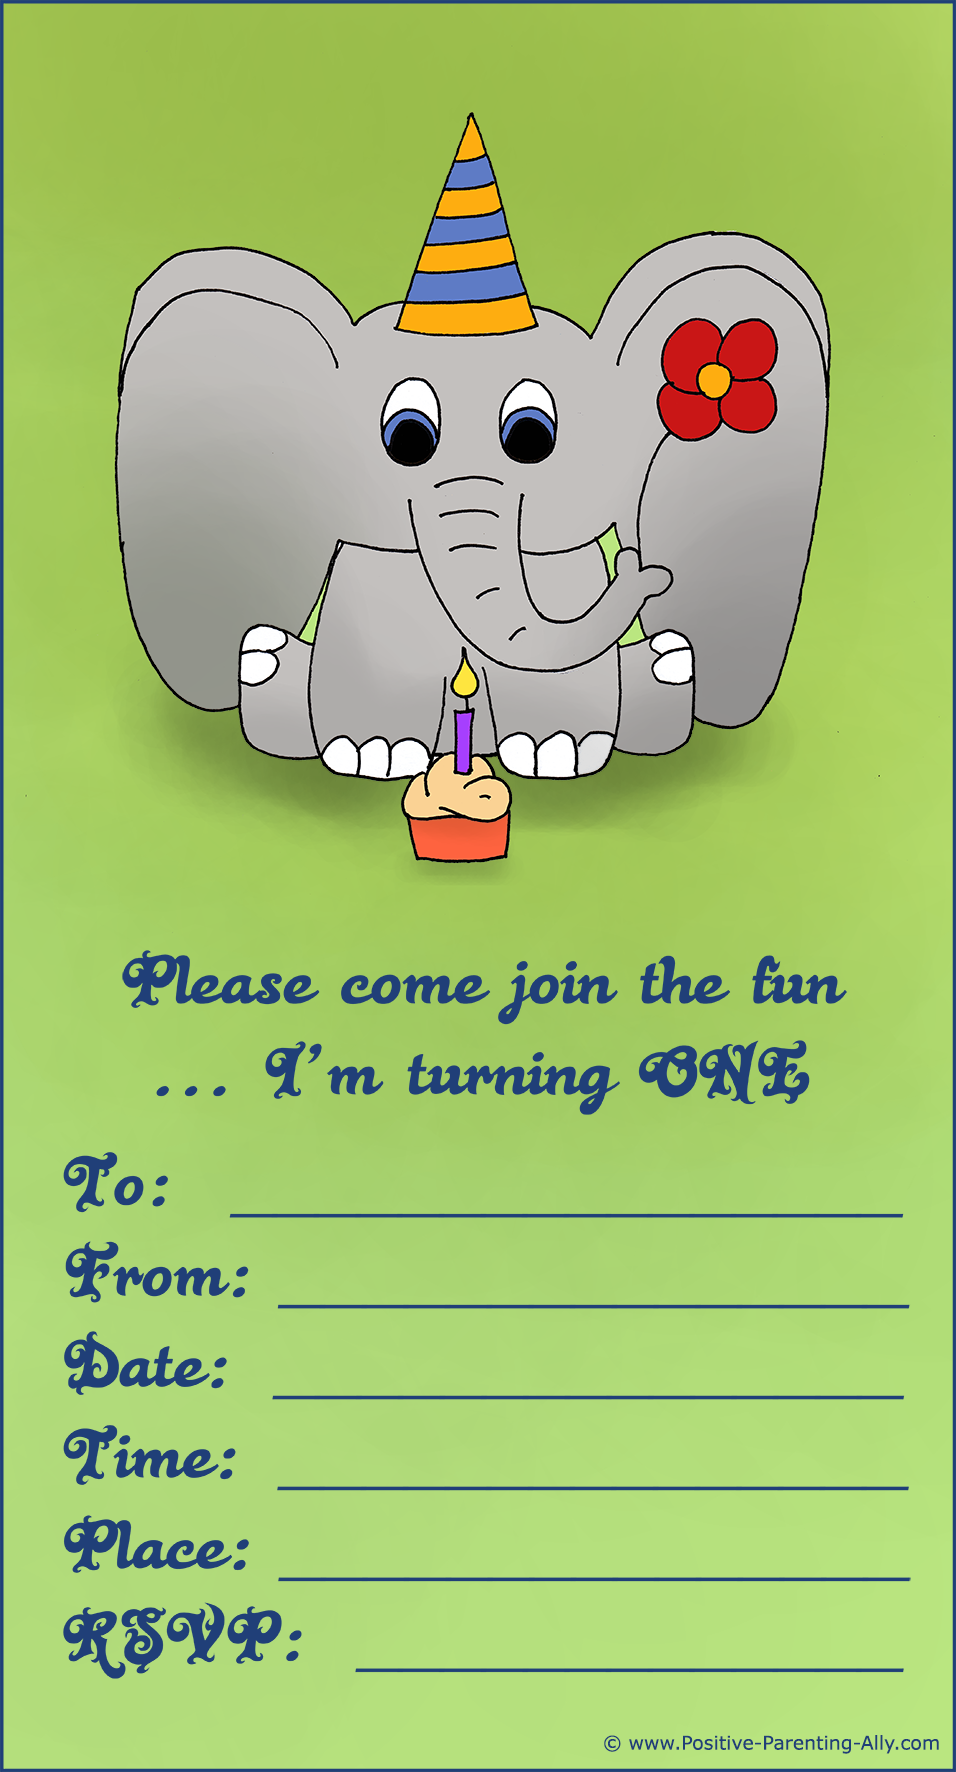 Printable first birthday party invitations: Cute baby elephant for both girls and boys.